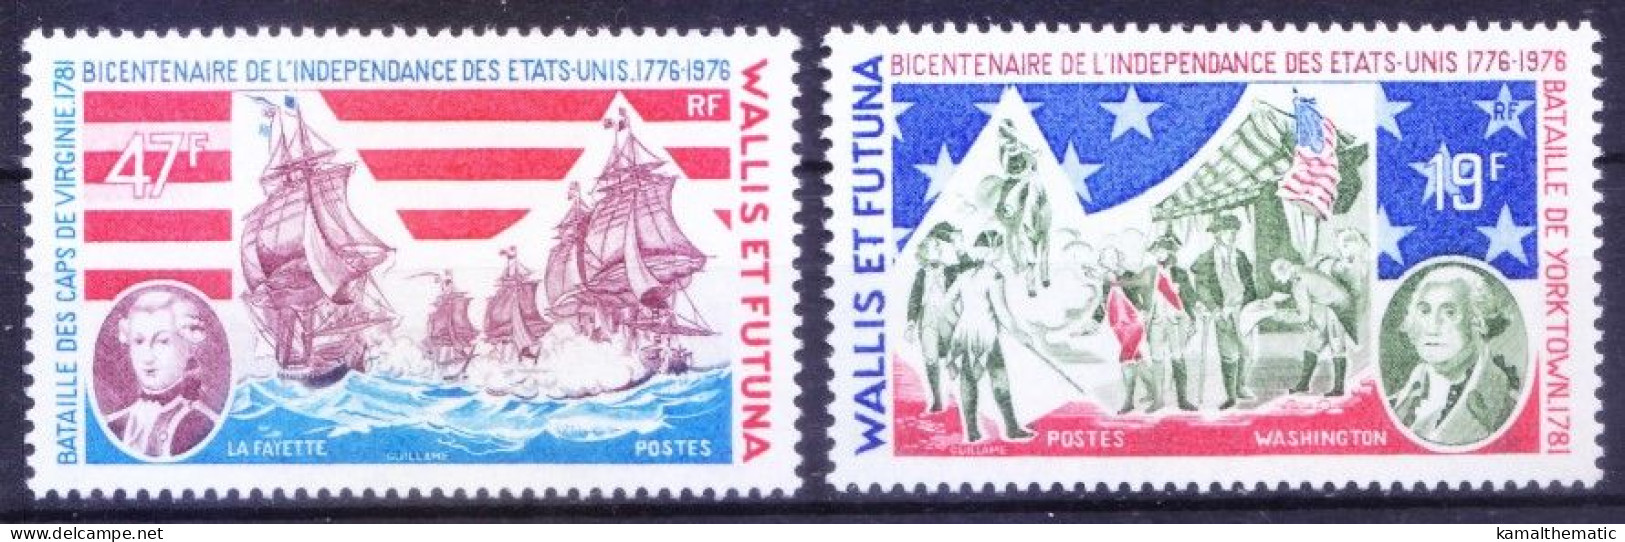 Wallis And Futuna 196 MNH 2v, Bicentenary Of Independence Of United States - Us Independence